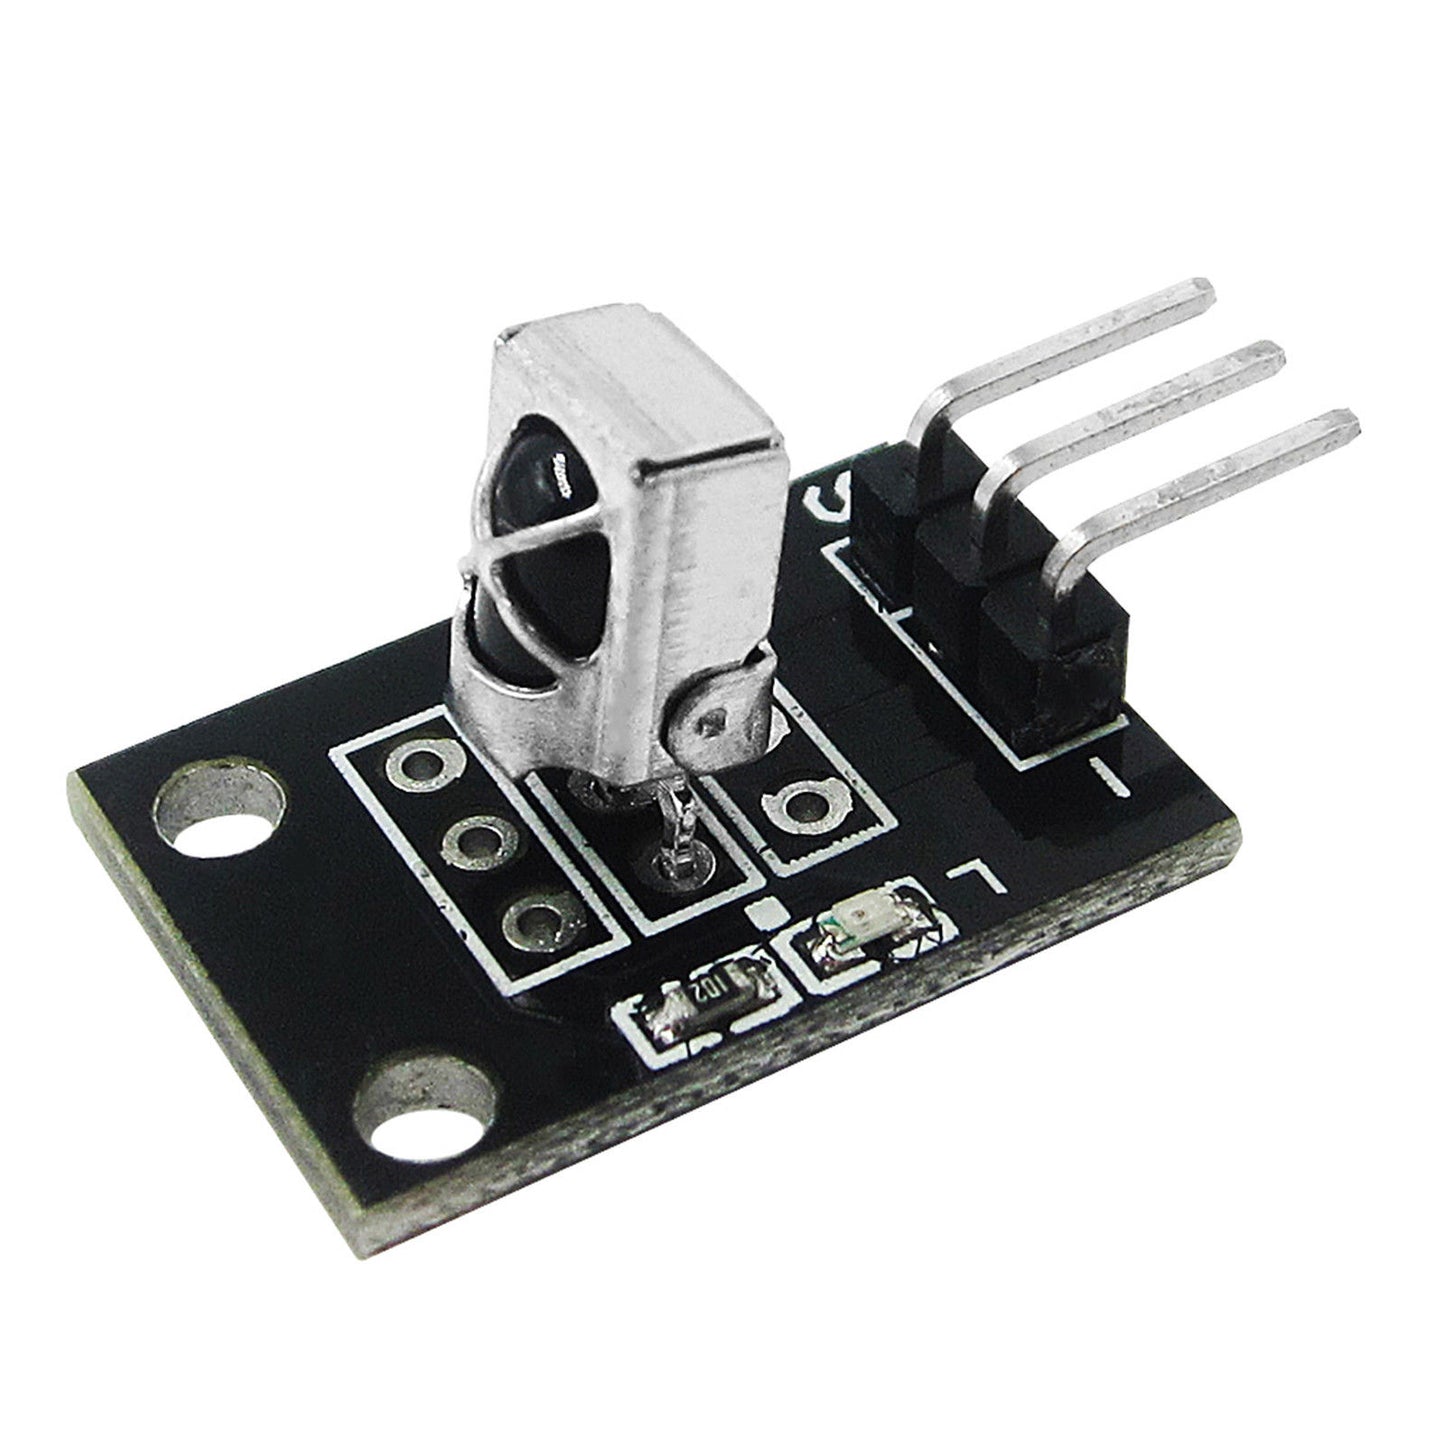 2C30003 KY-022 Infrared receiver module